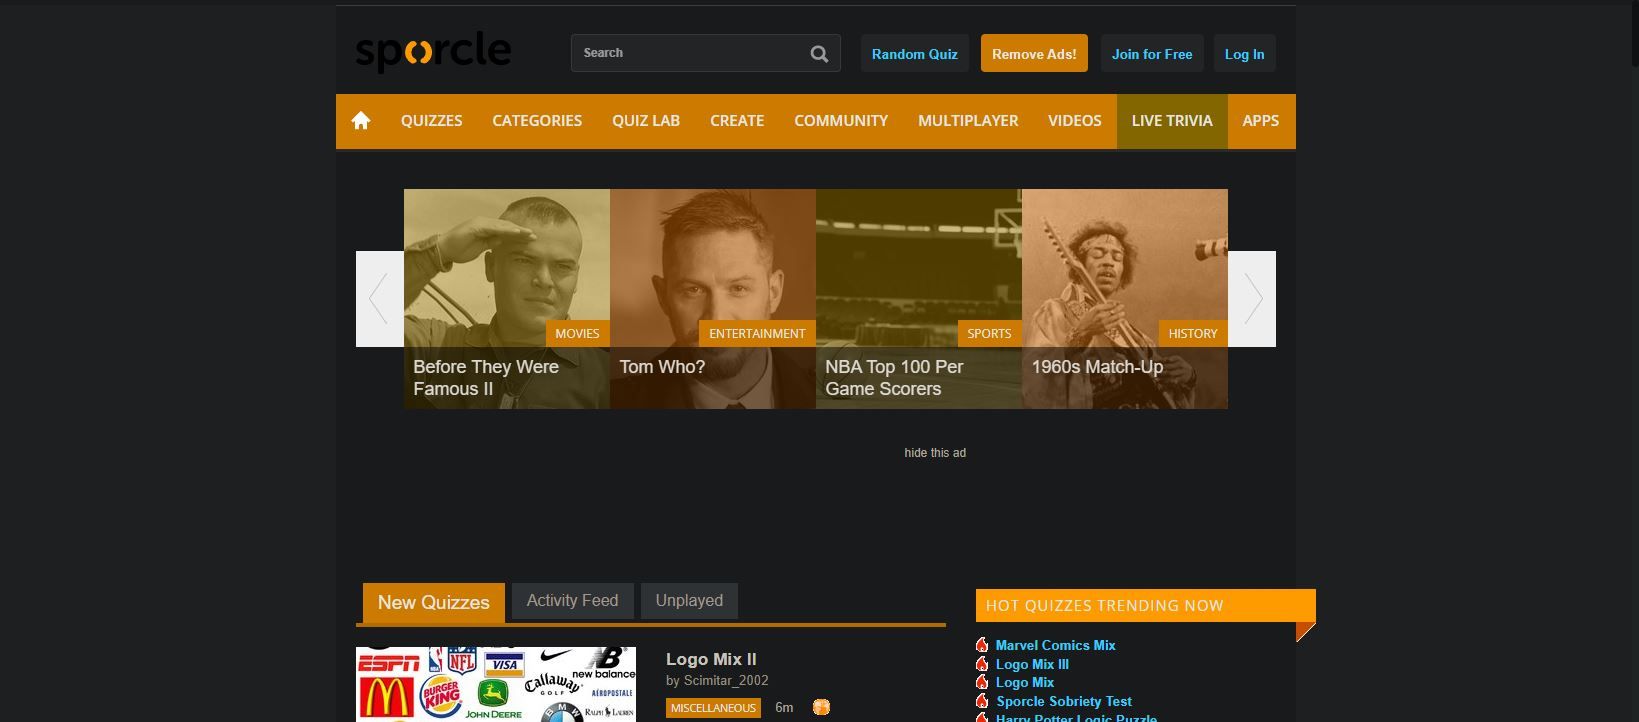 A Screenshot of Sprocle's Landing Page